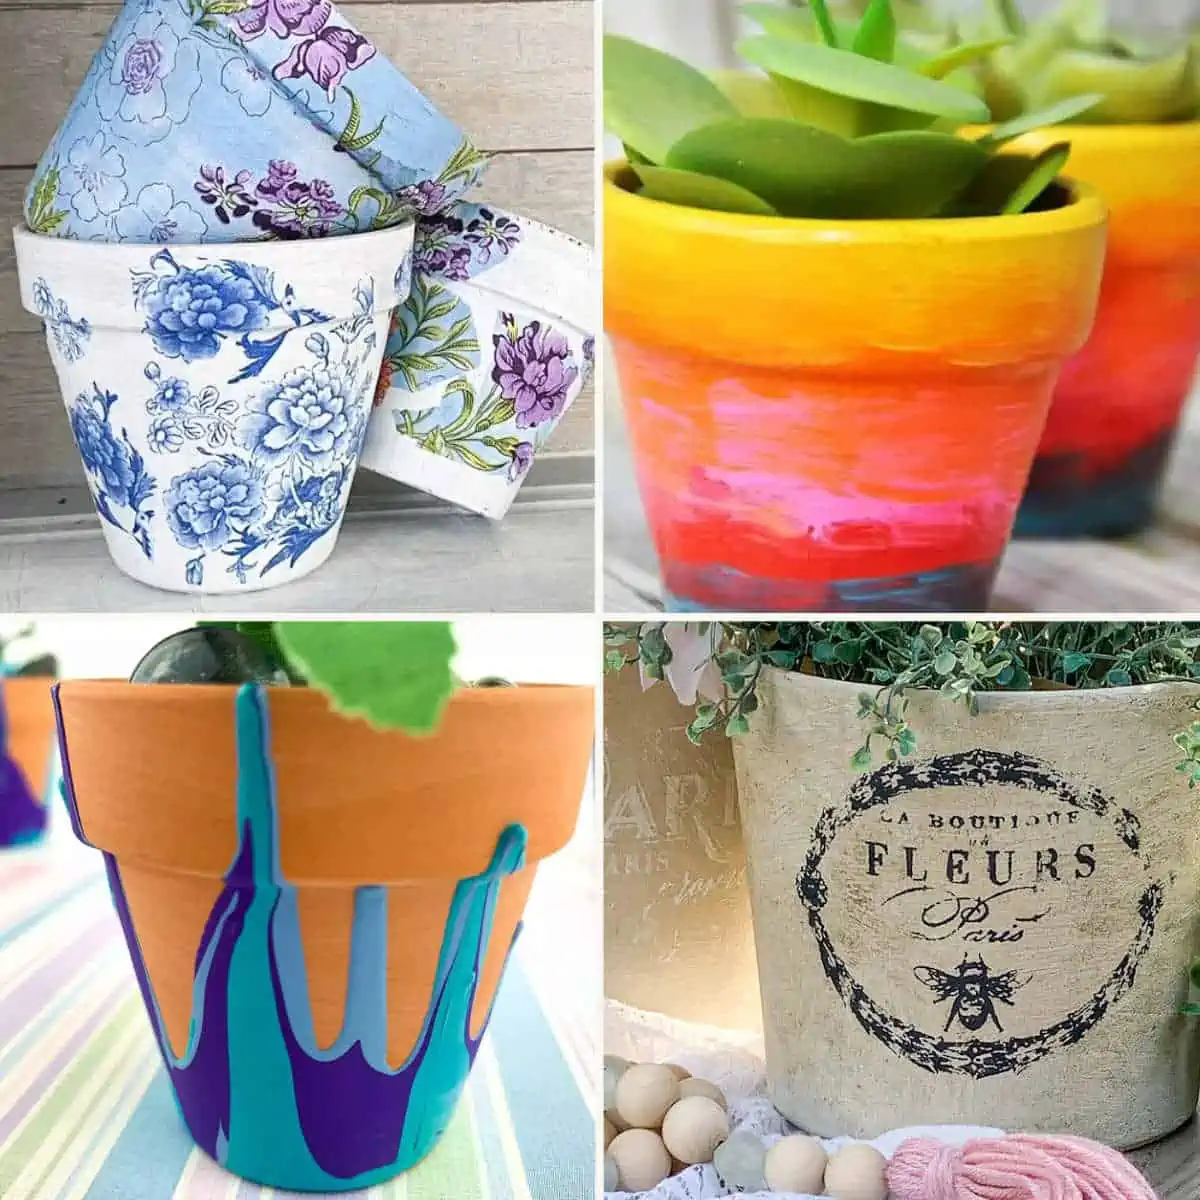 4 painted clay pots ideas, one rainbow colored, one decoupaged, one drip pour painted and one with aged effect.